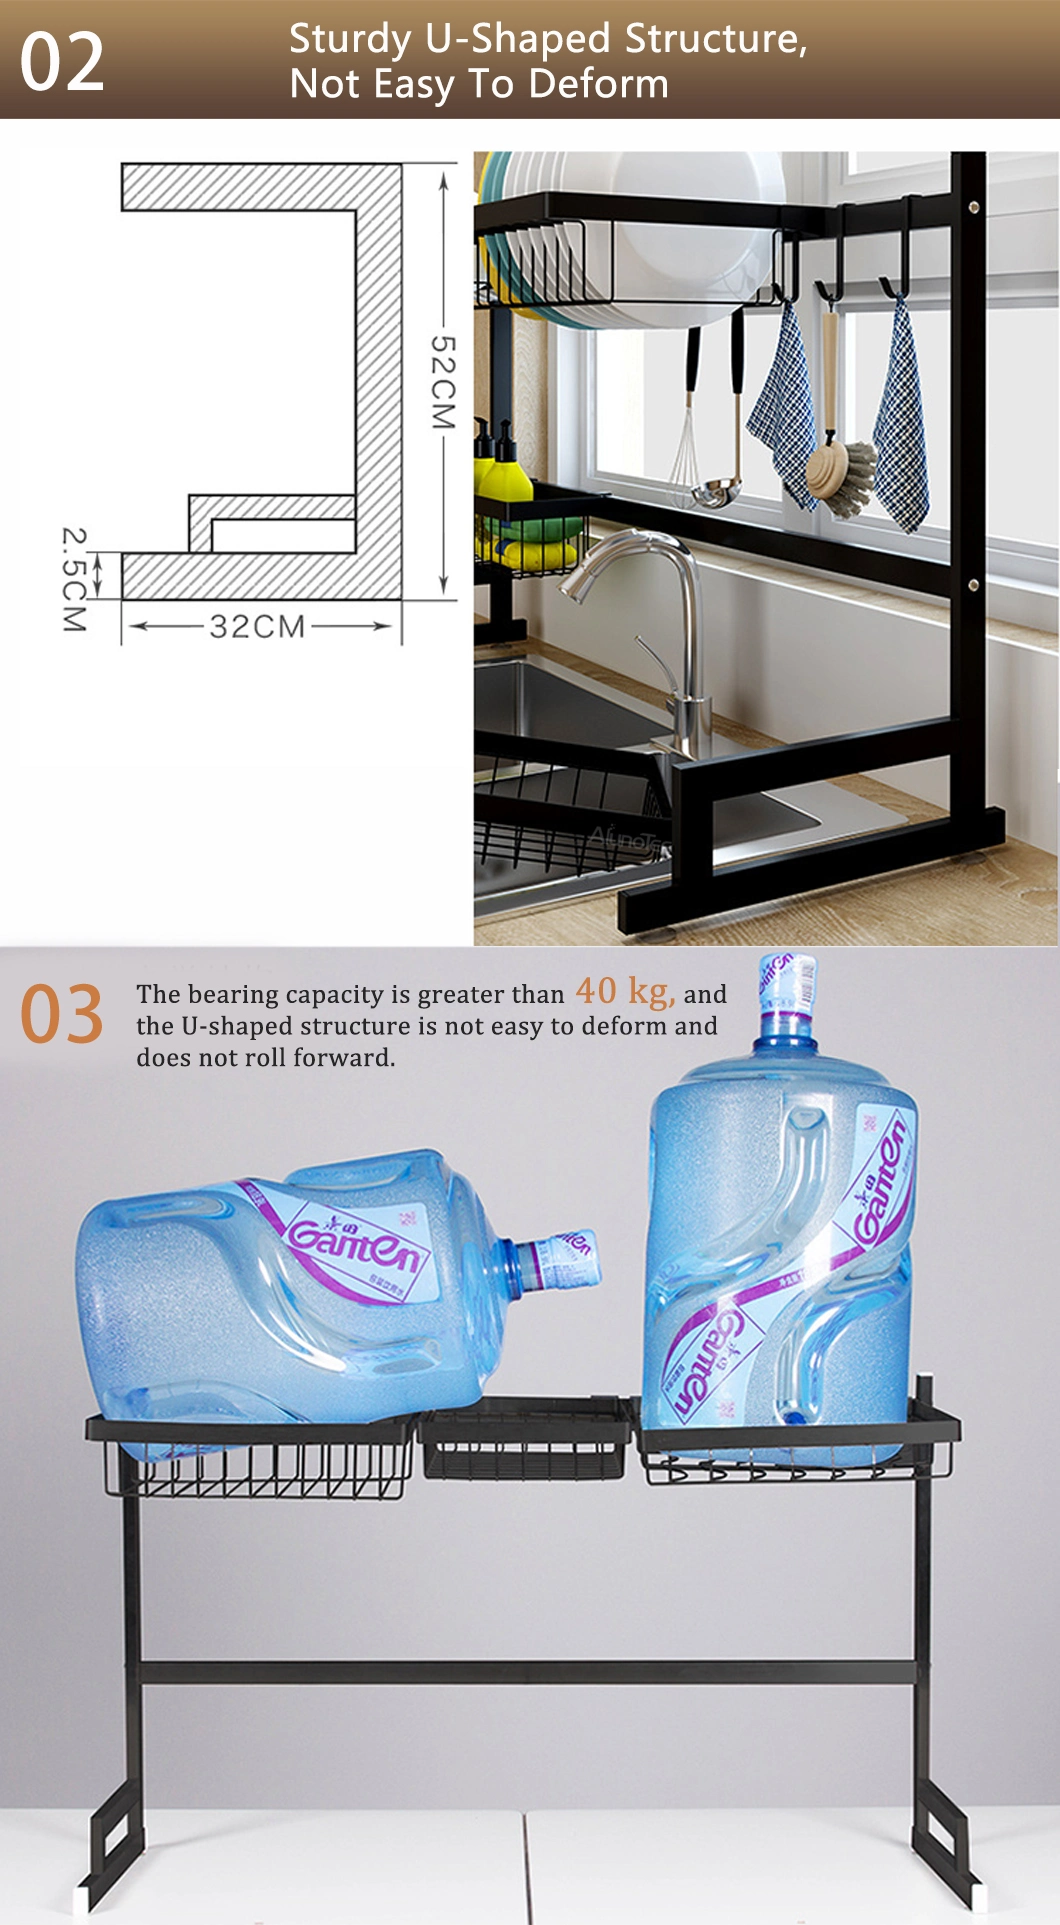 Easy DIY Adjustable Stainless Steel Stand Storage Shelf Over Sink Dish Drying Kitchen Rack